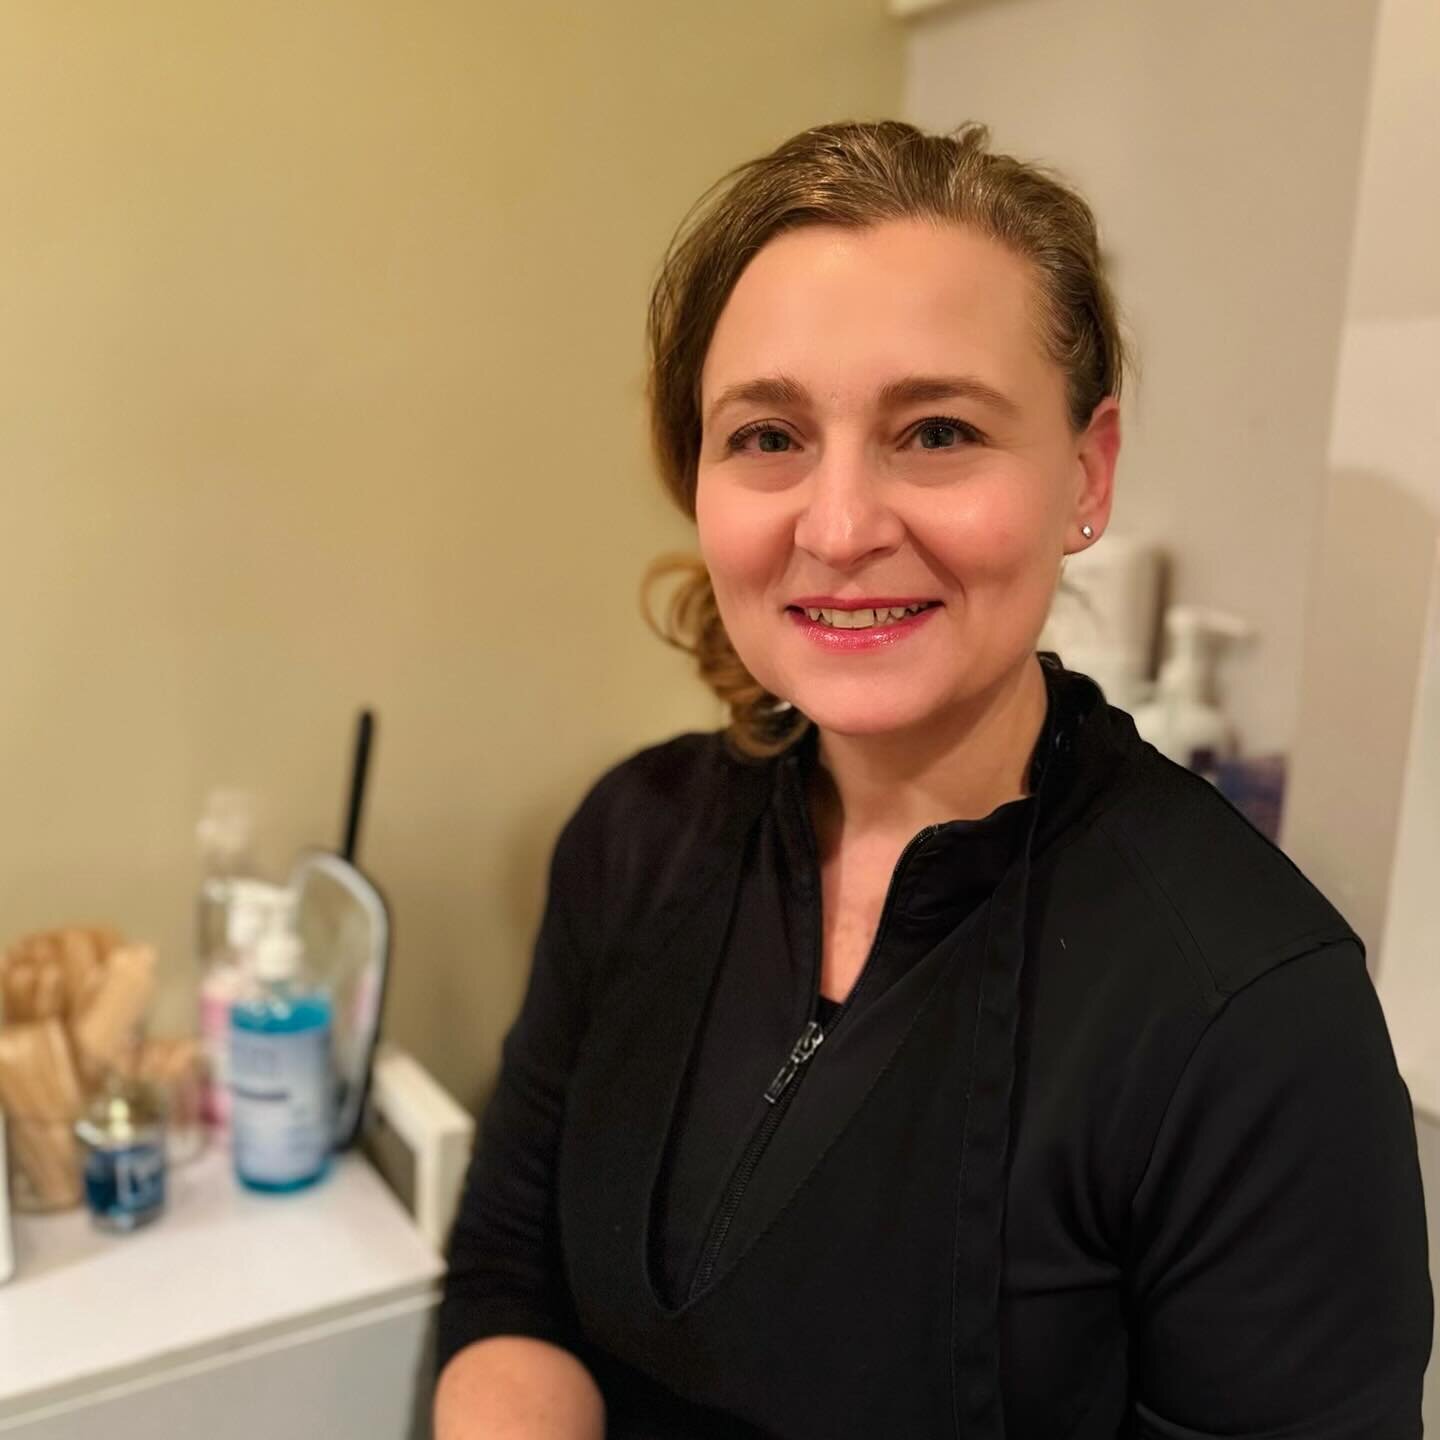 Please join us in welcoming our newest esthetician, Amy Houlihan!

Amy brings with her, a passion for making her client&rsquo;s skin glow, and over 20 years of experience! Some of Amy&rsquo;s favorite treatments involve exfoliation. She especially en